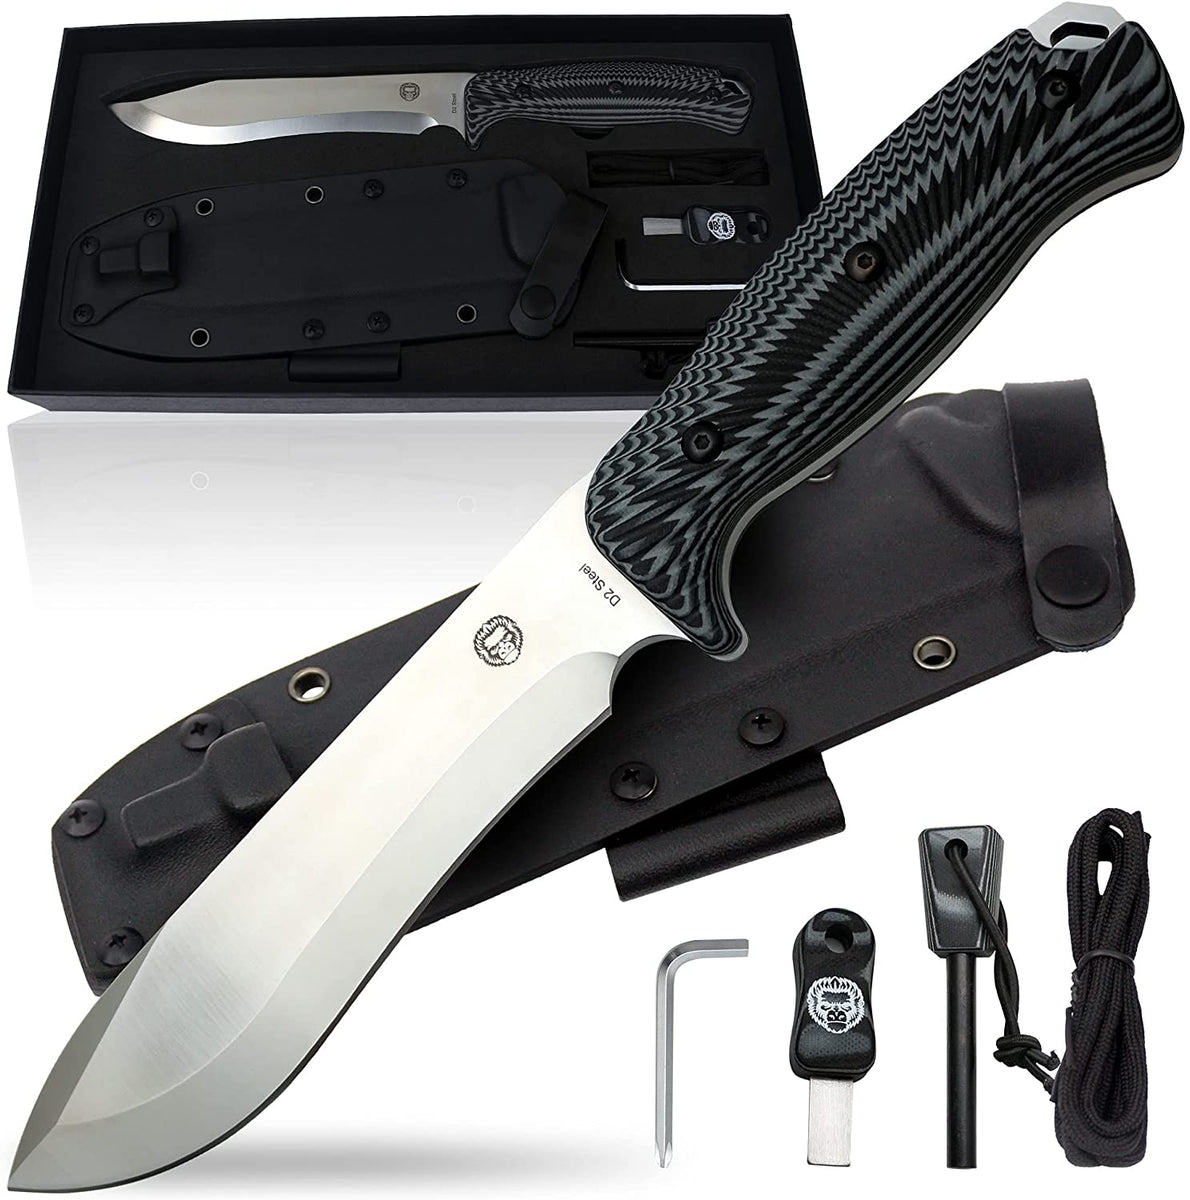 Large 1095 Survival – Holtzman\'s orders $150 Gorilla FREE | for Survival SHIPPING Knife